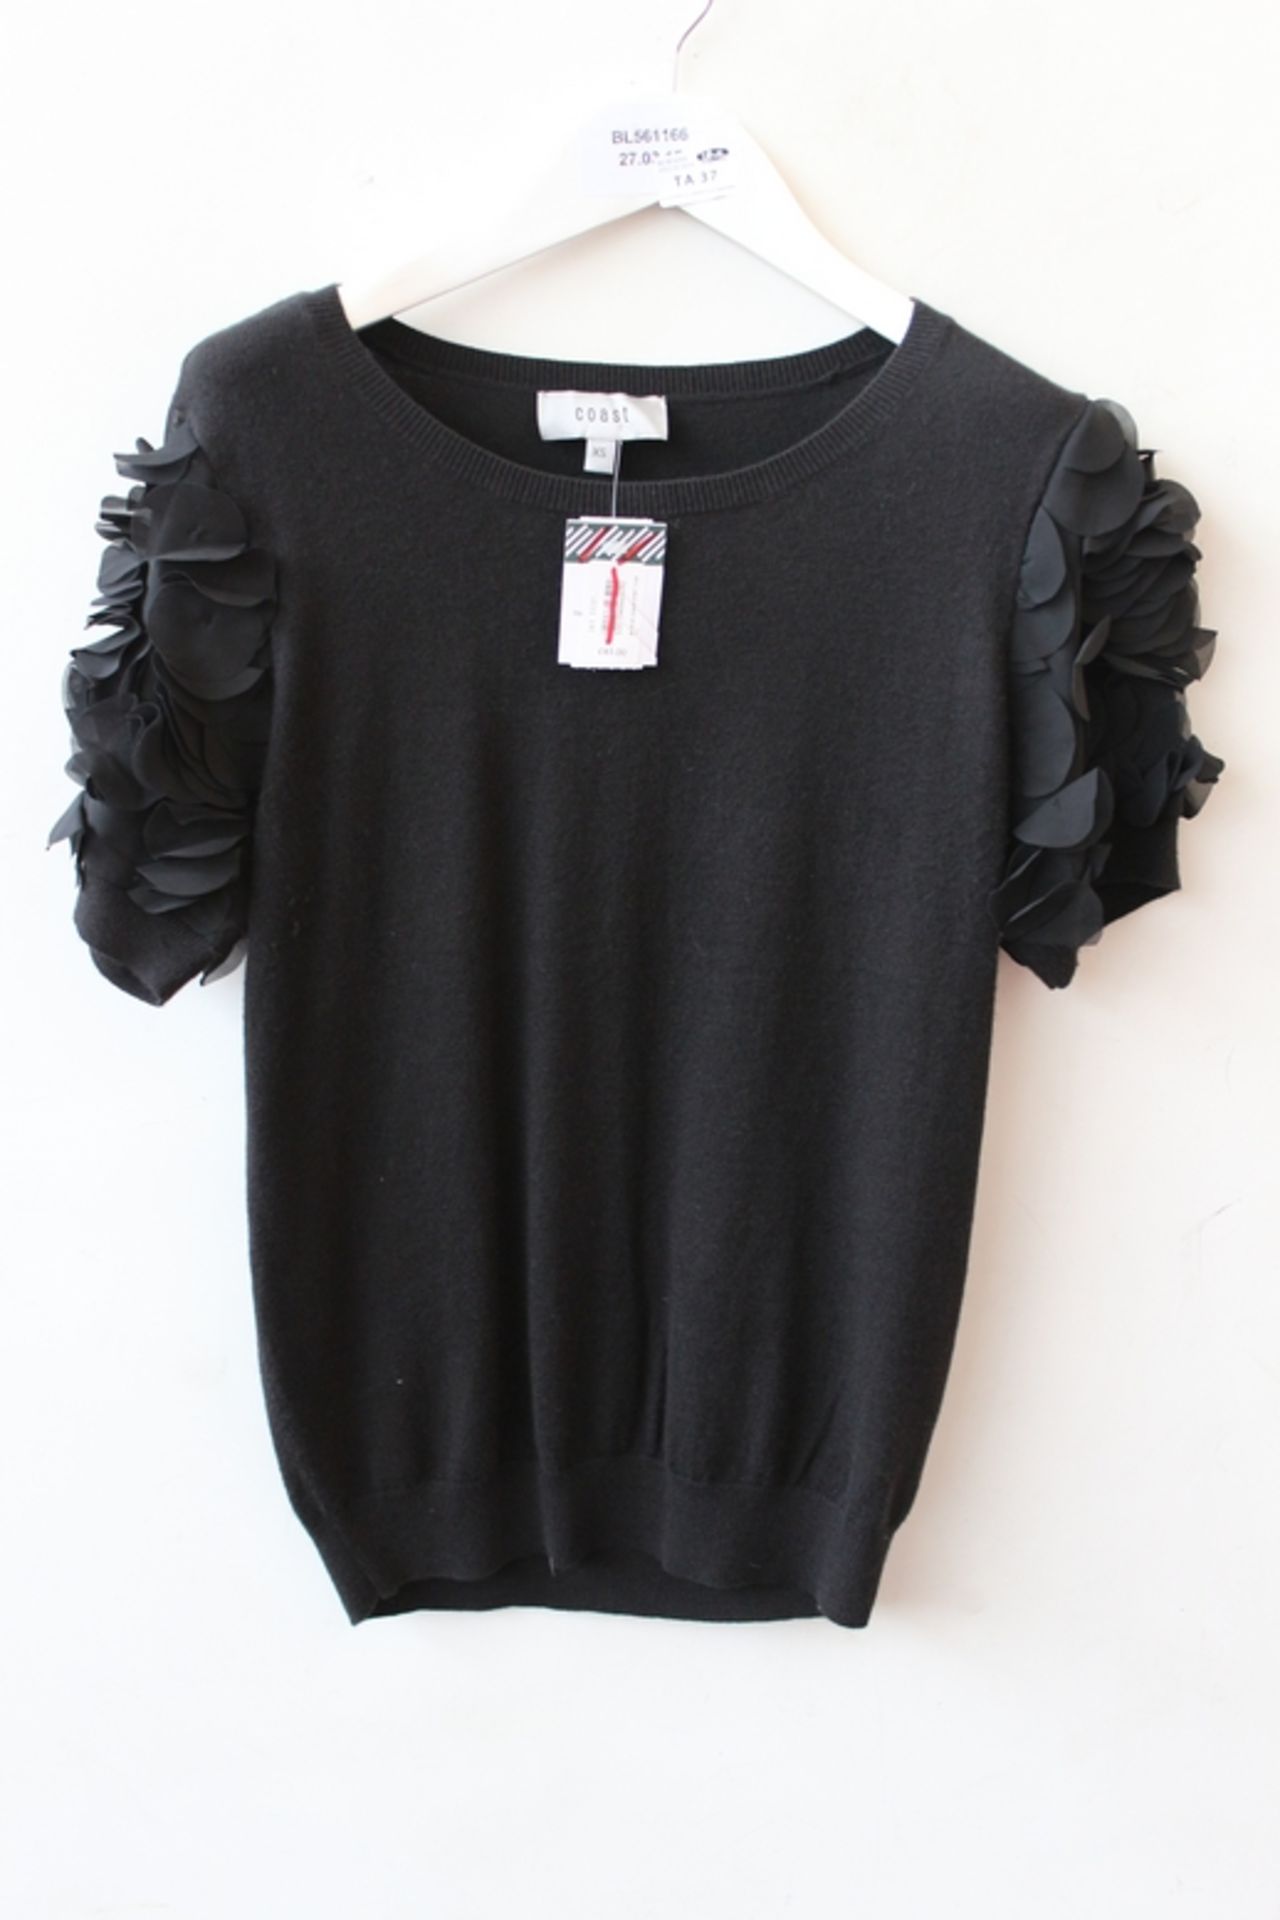 ONE OASIS BLACK DIANA KNIT TOP SIZE XS RRP £65 (BL561166)